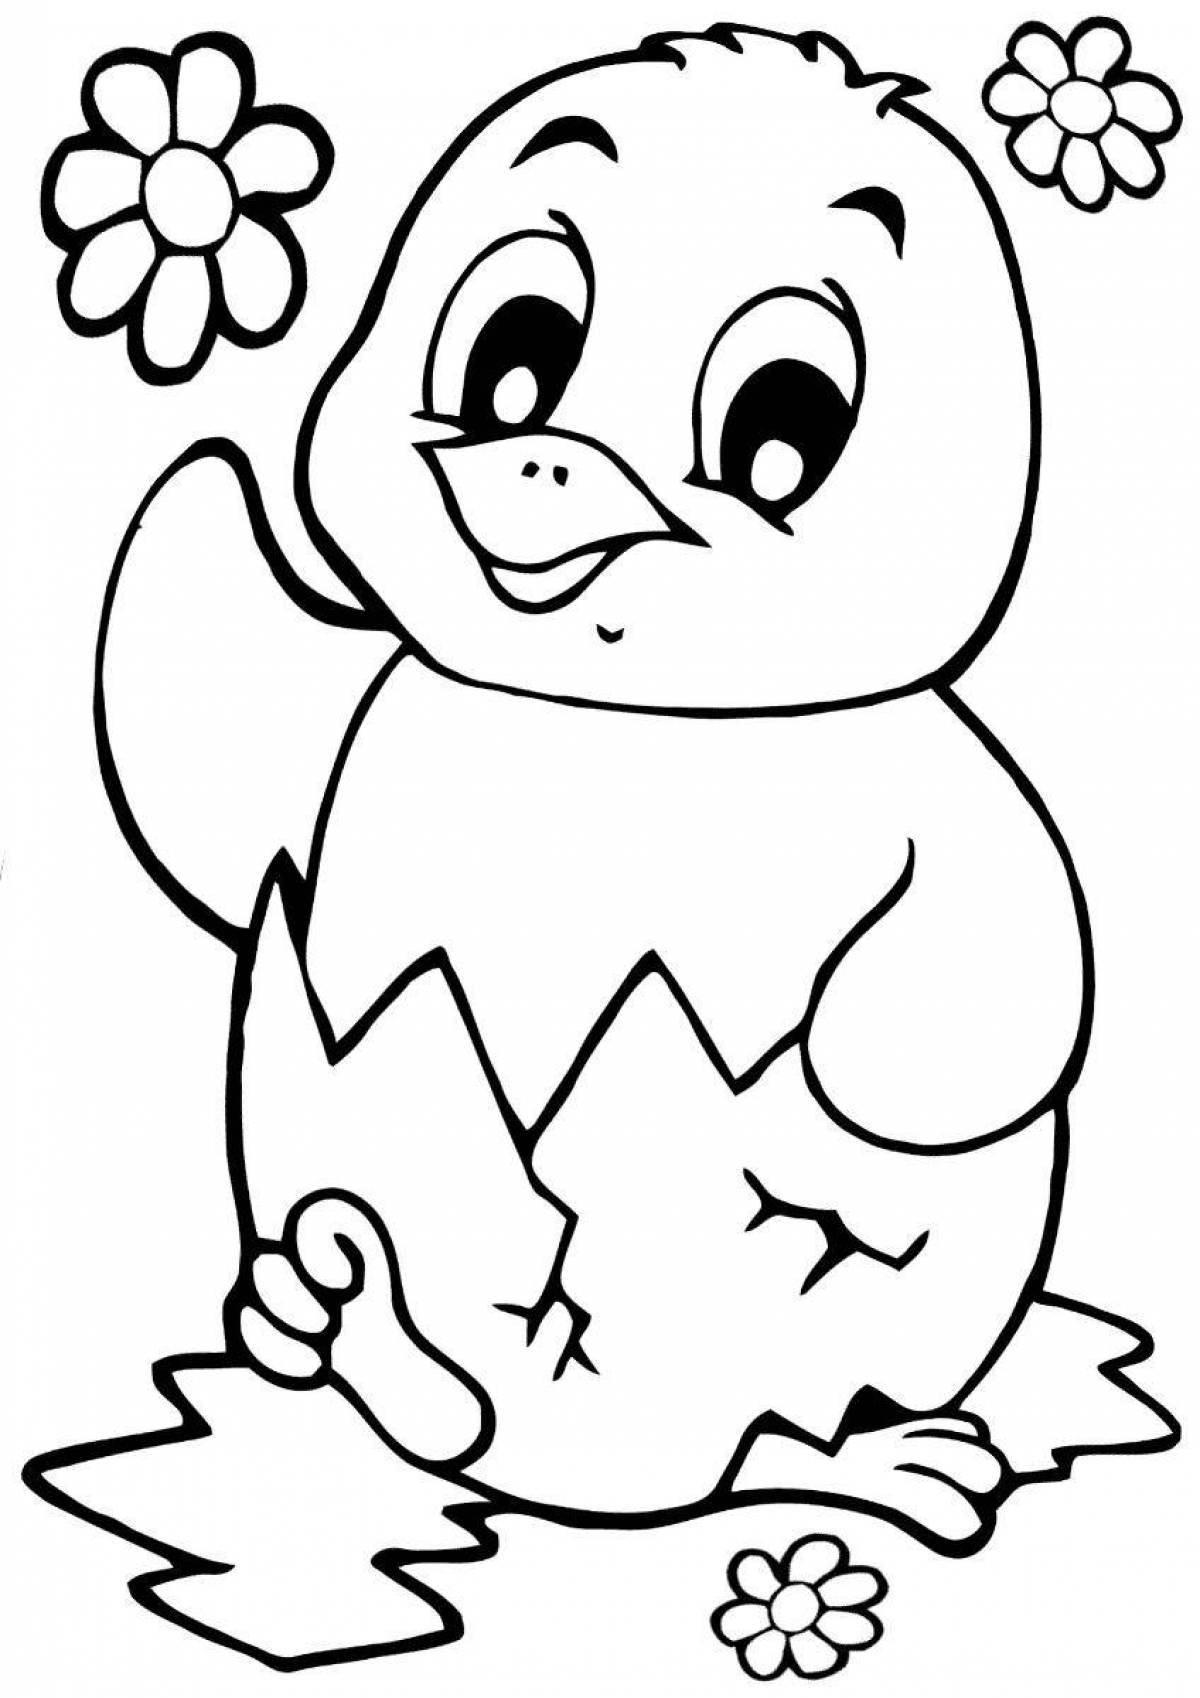 Chicken coloring page for children 3-4 years old